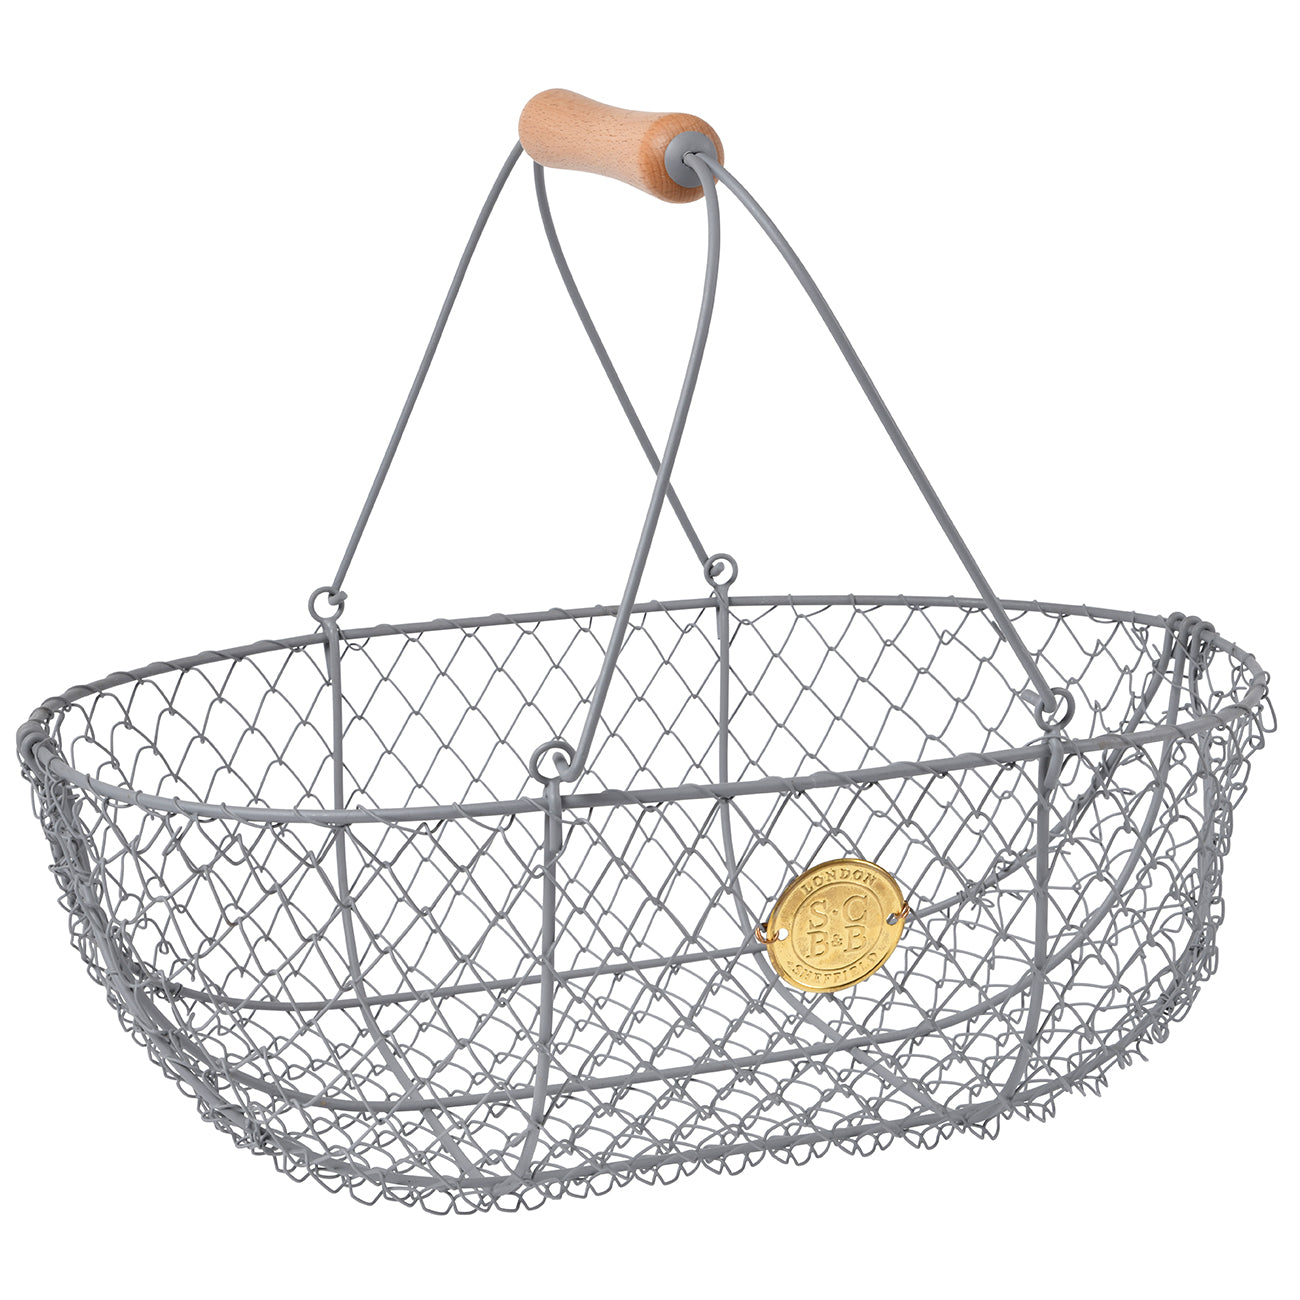 This attractive hand-crafted wire basket is an absolute delight to use.